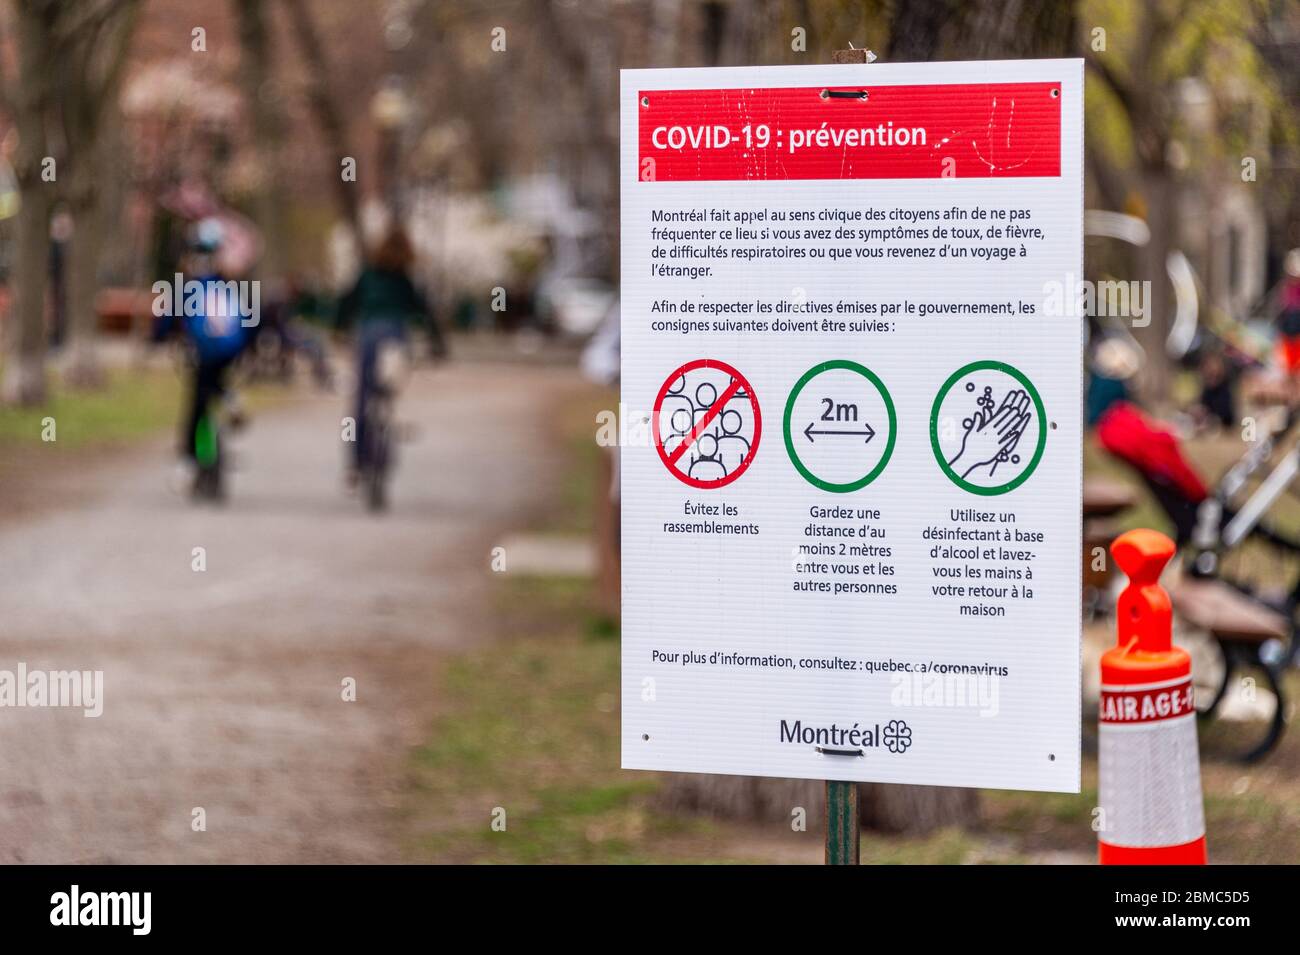 Montreal, CA - 8 May 2020 : Sign showing french Covid-19 safety guidelines at the entrance of a Park. Stock Photo